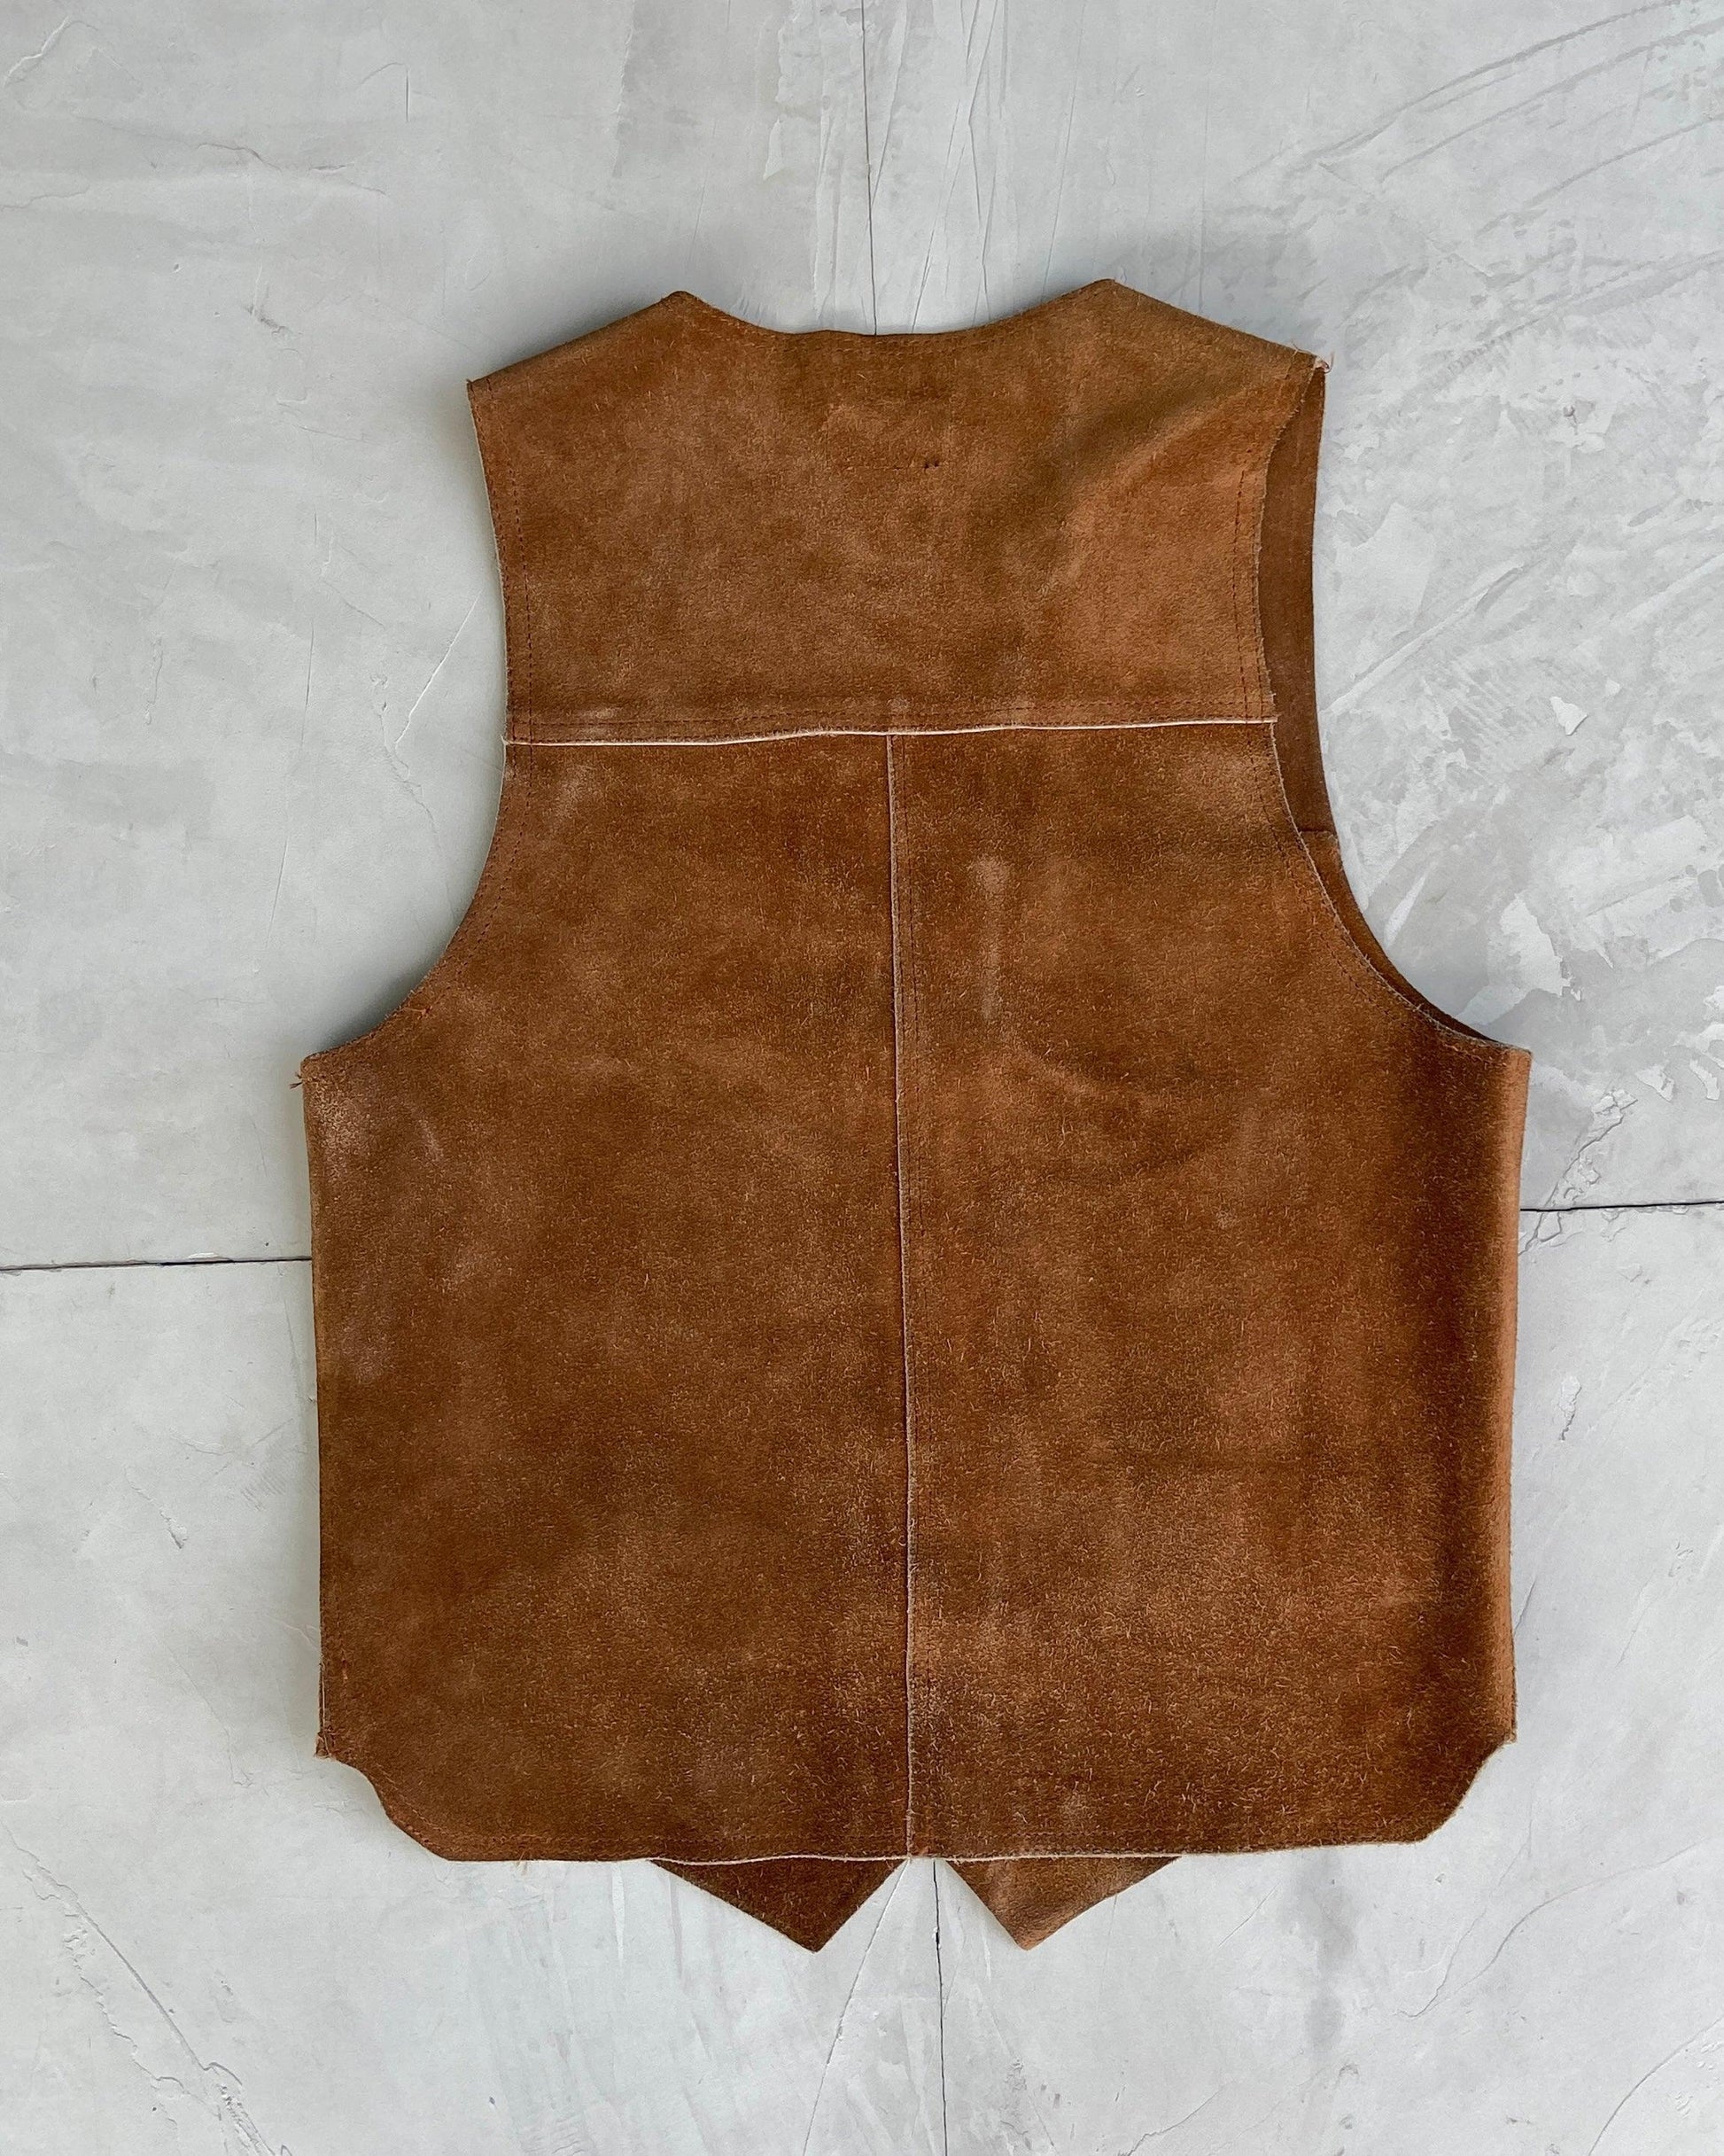 DIESEL 2000'S SUEDE LEATHER WAISTCOAT JACKET - L - Known Source